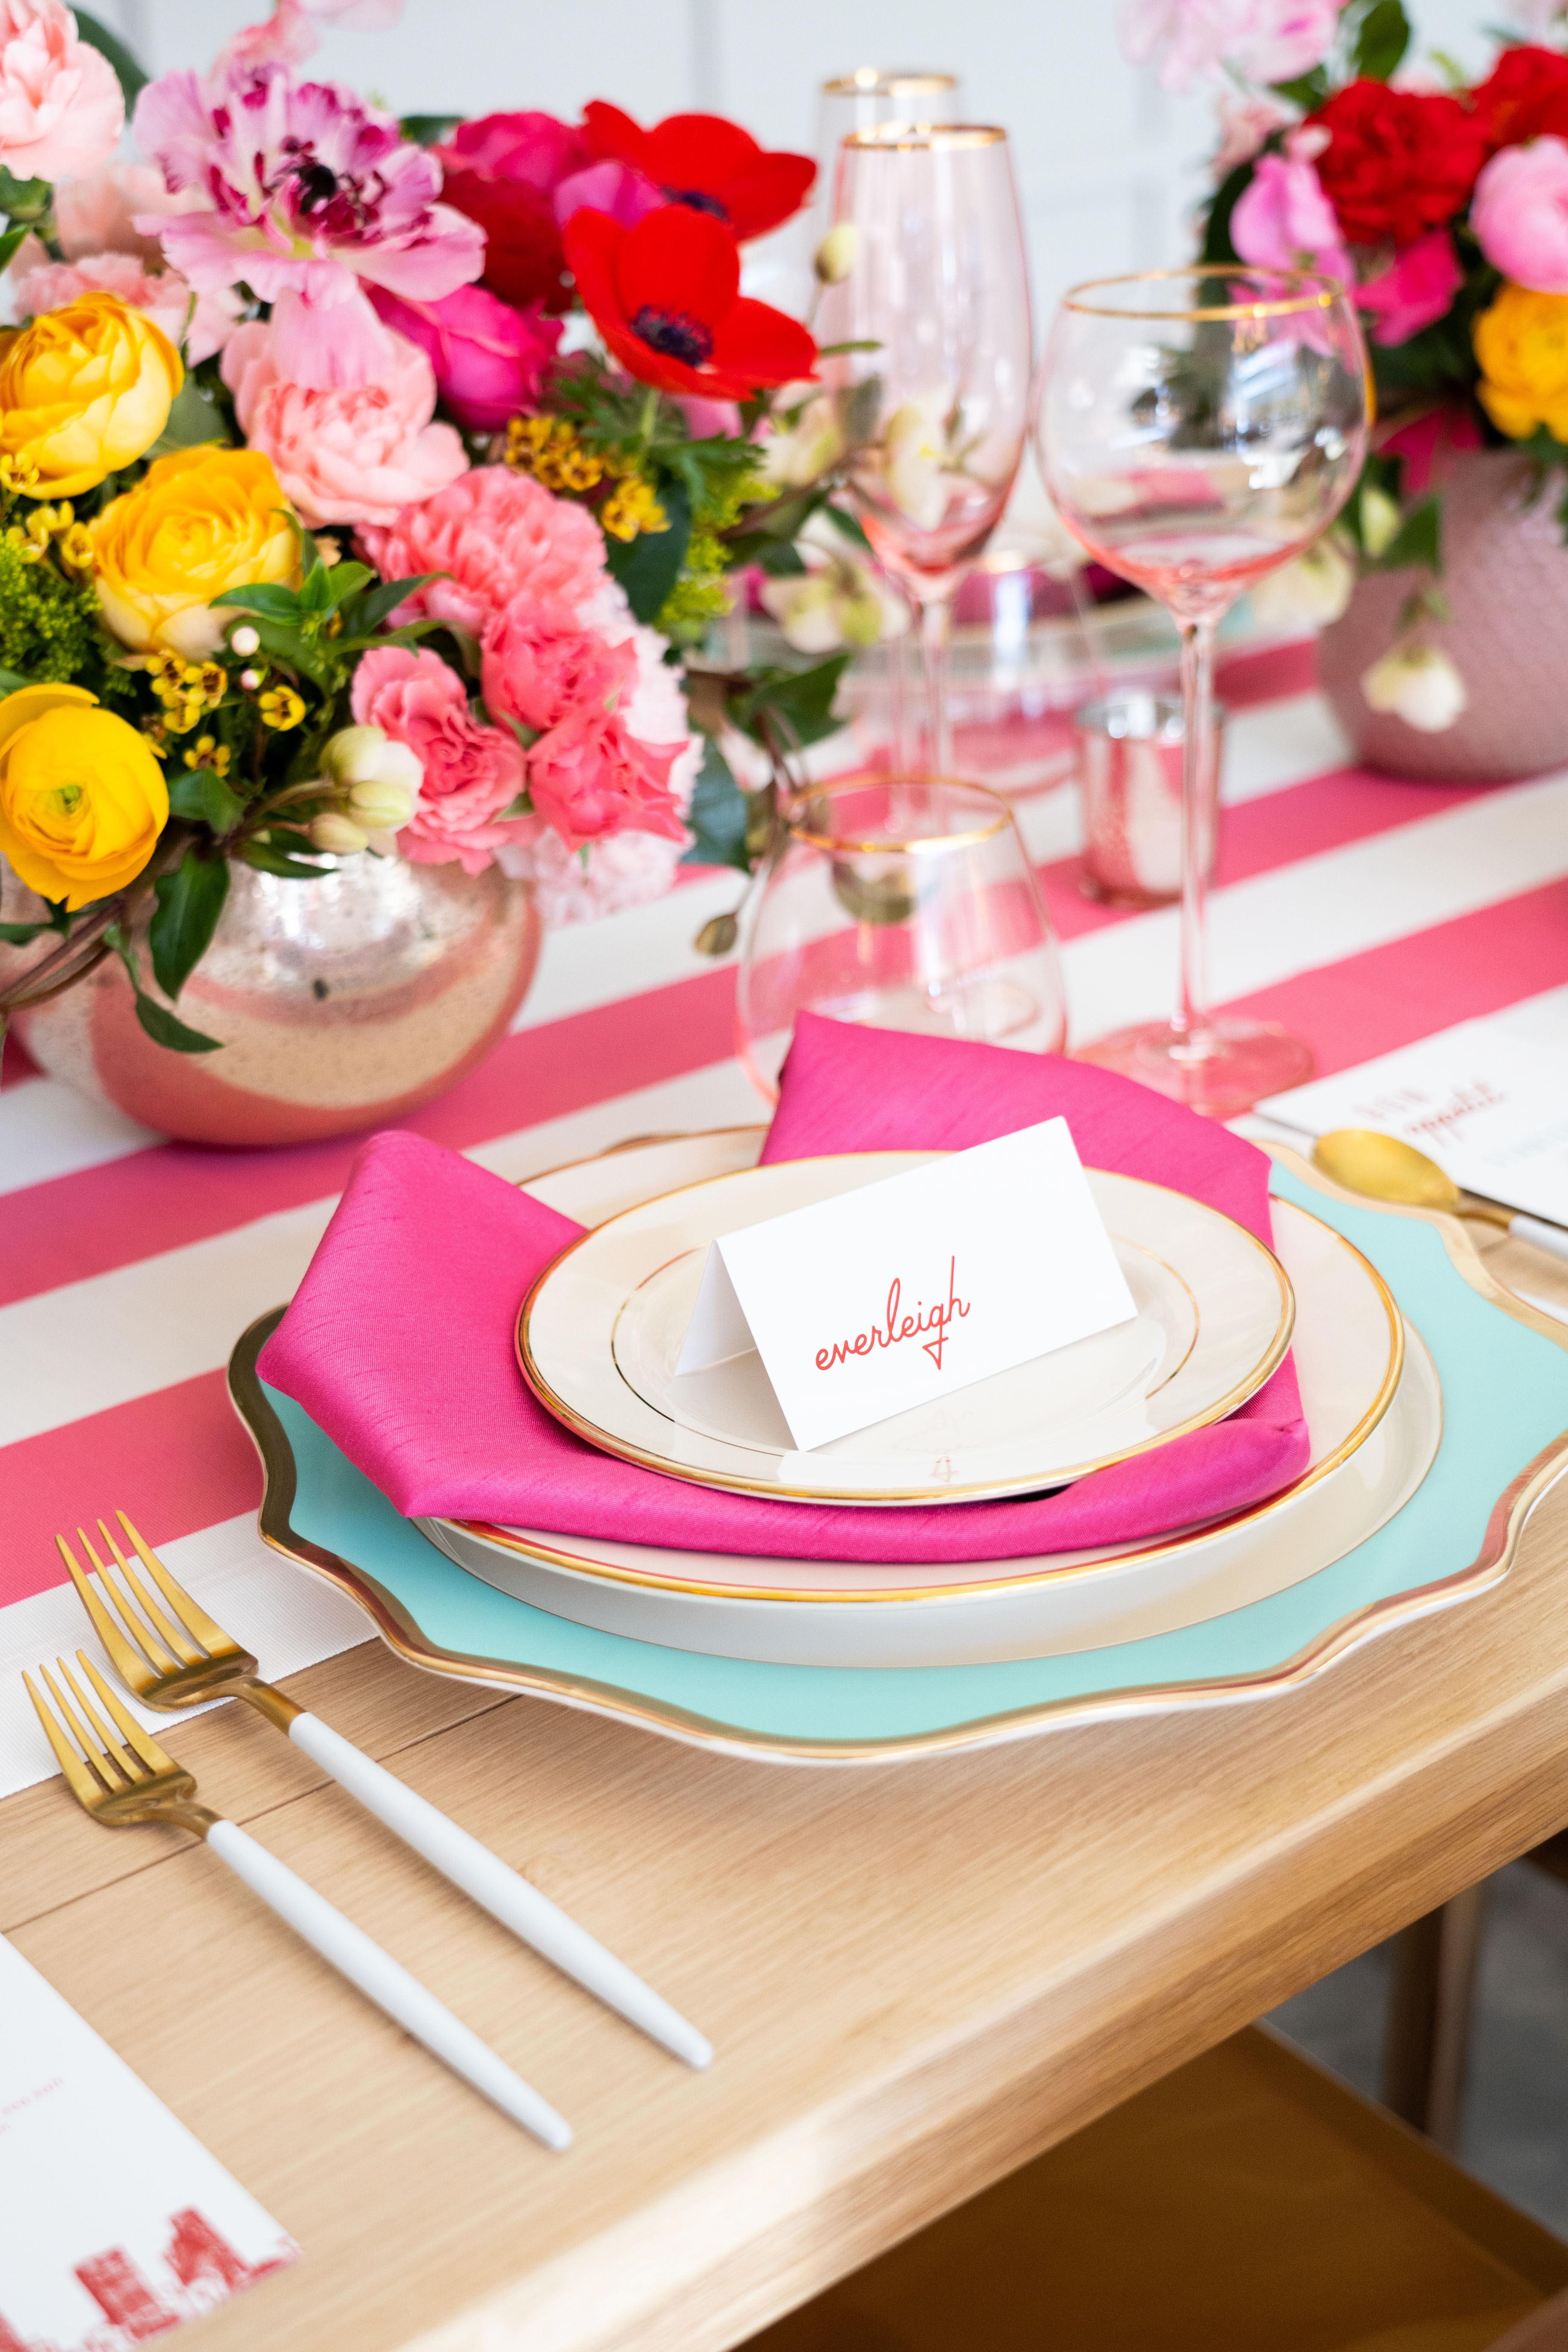 Our Valentine's Day reception featuring colorful dining ware with touches of gold and lush yellow, red, and pink flower arrangements full of peonies and anemones by Winston and Main.